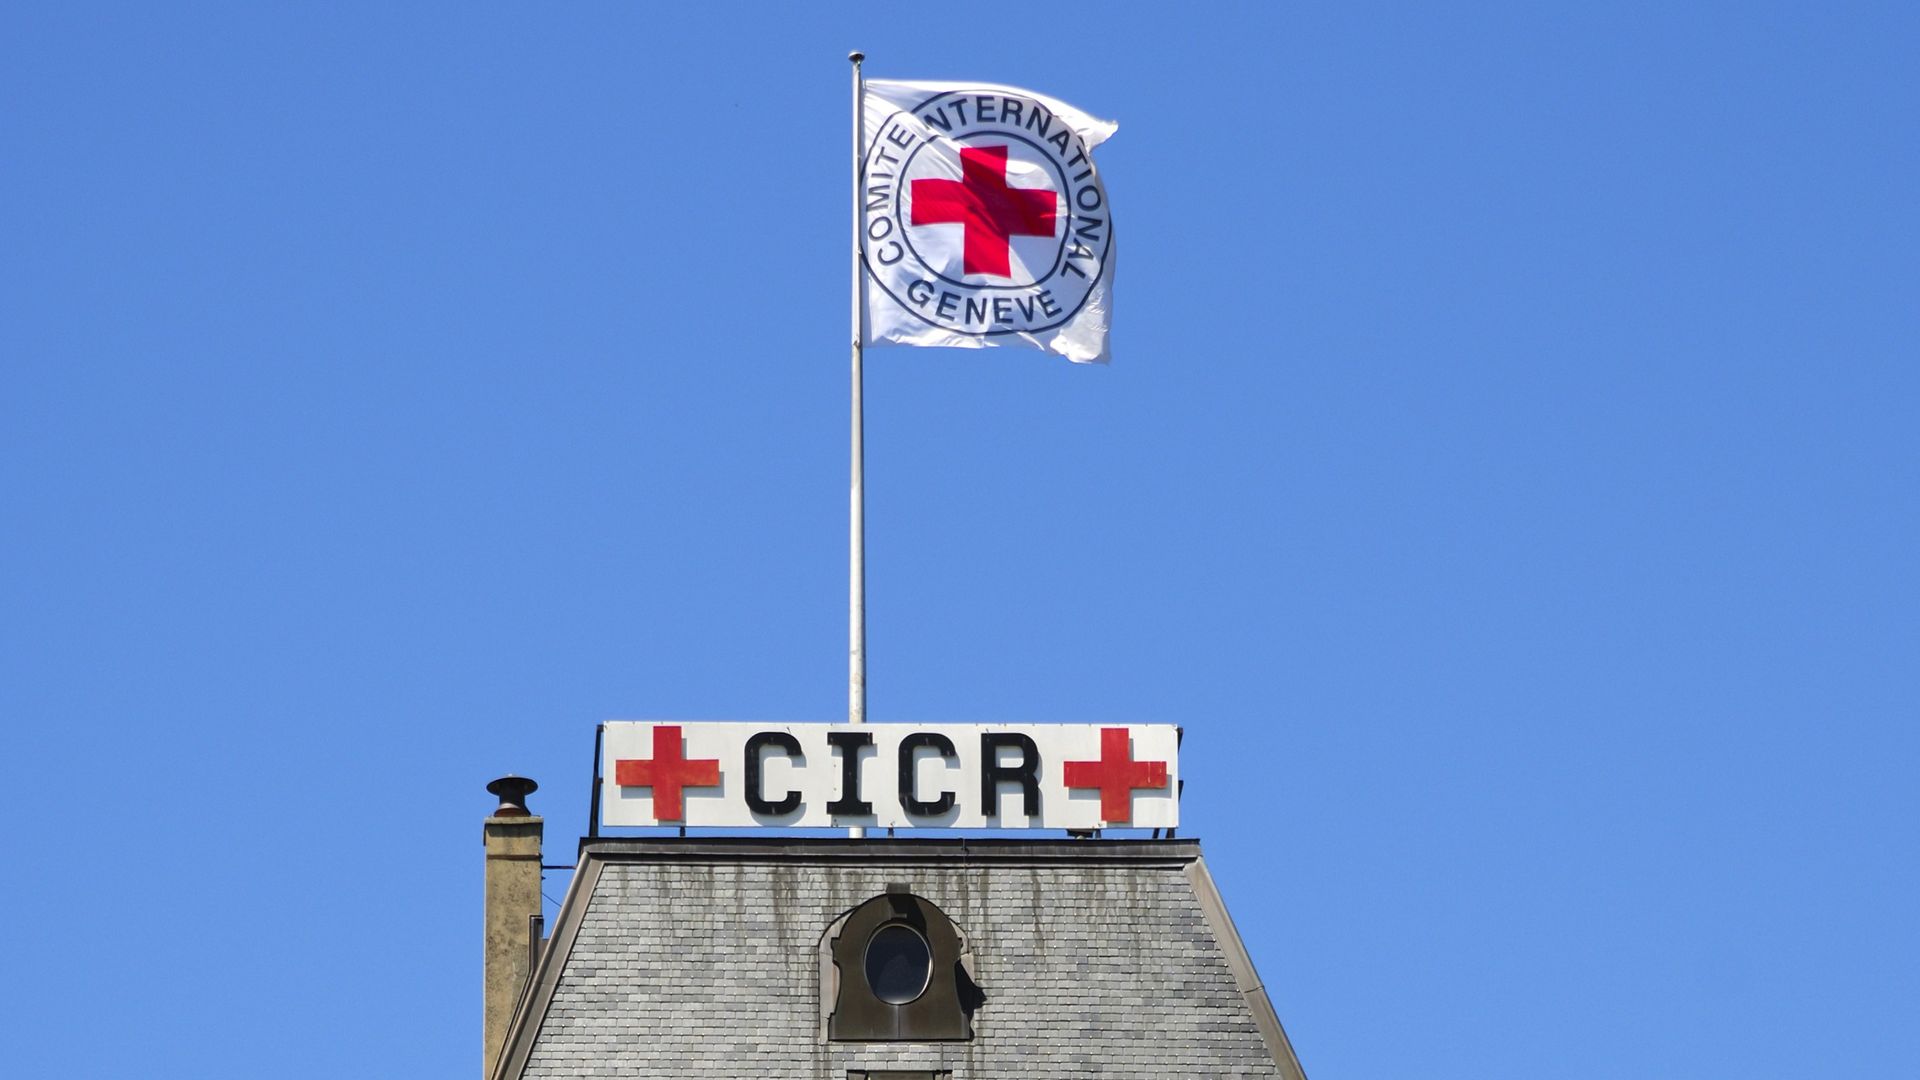 Headquarters of the International Committee of the Red Cross, ICRC, with the Red Cross flag, Geneva, Switzerland.